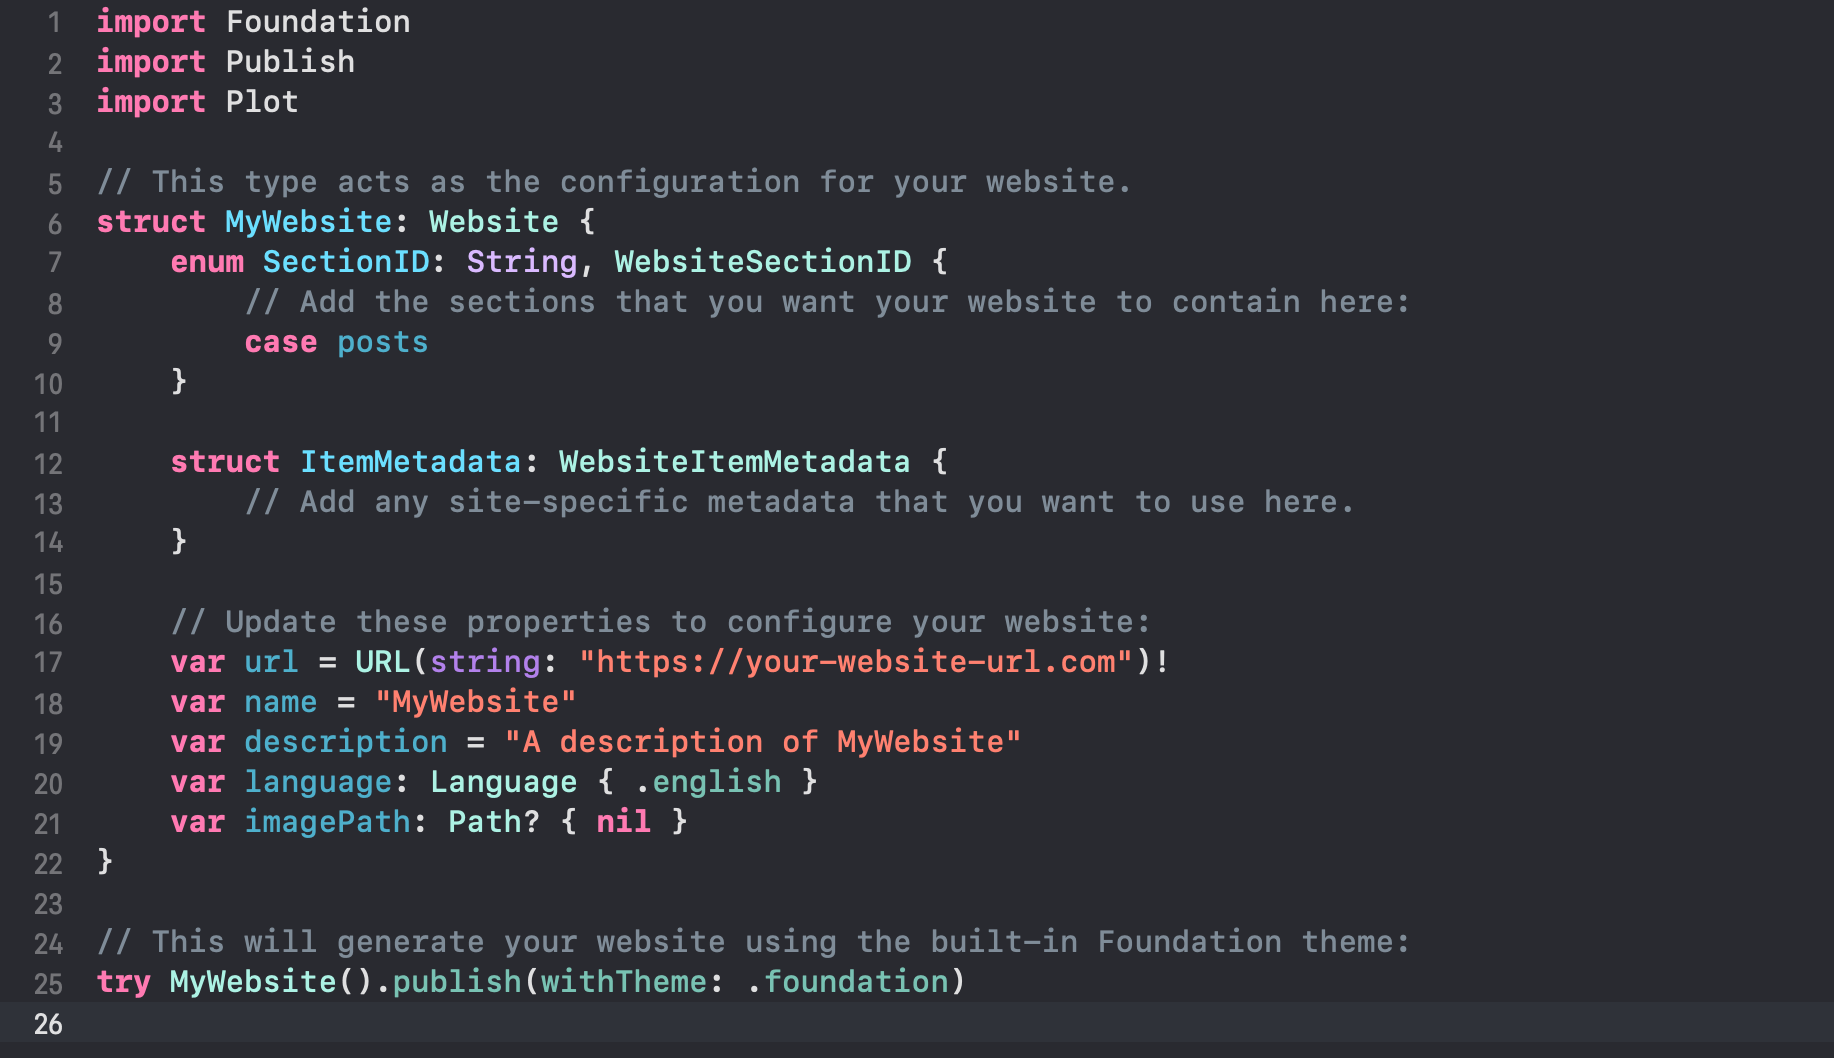 main.swift file showing the pre-defined configuration for the website